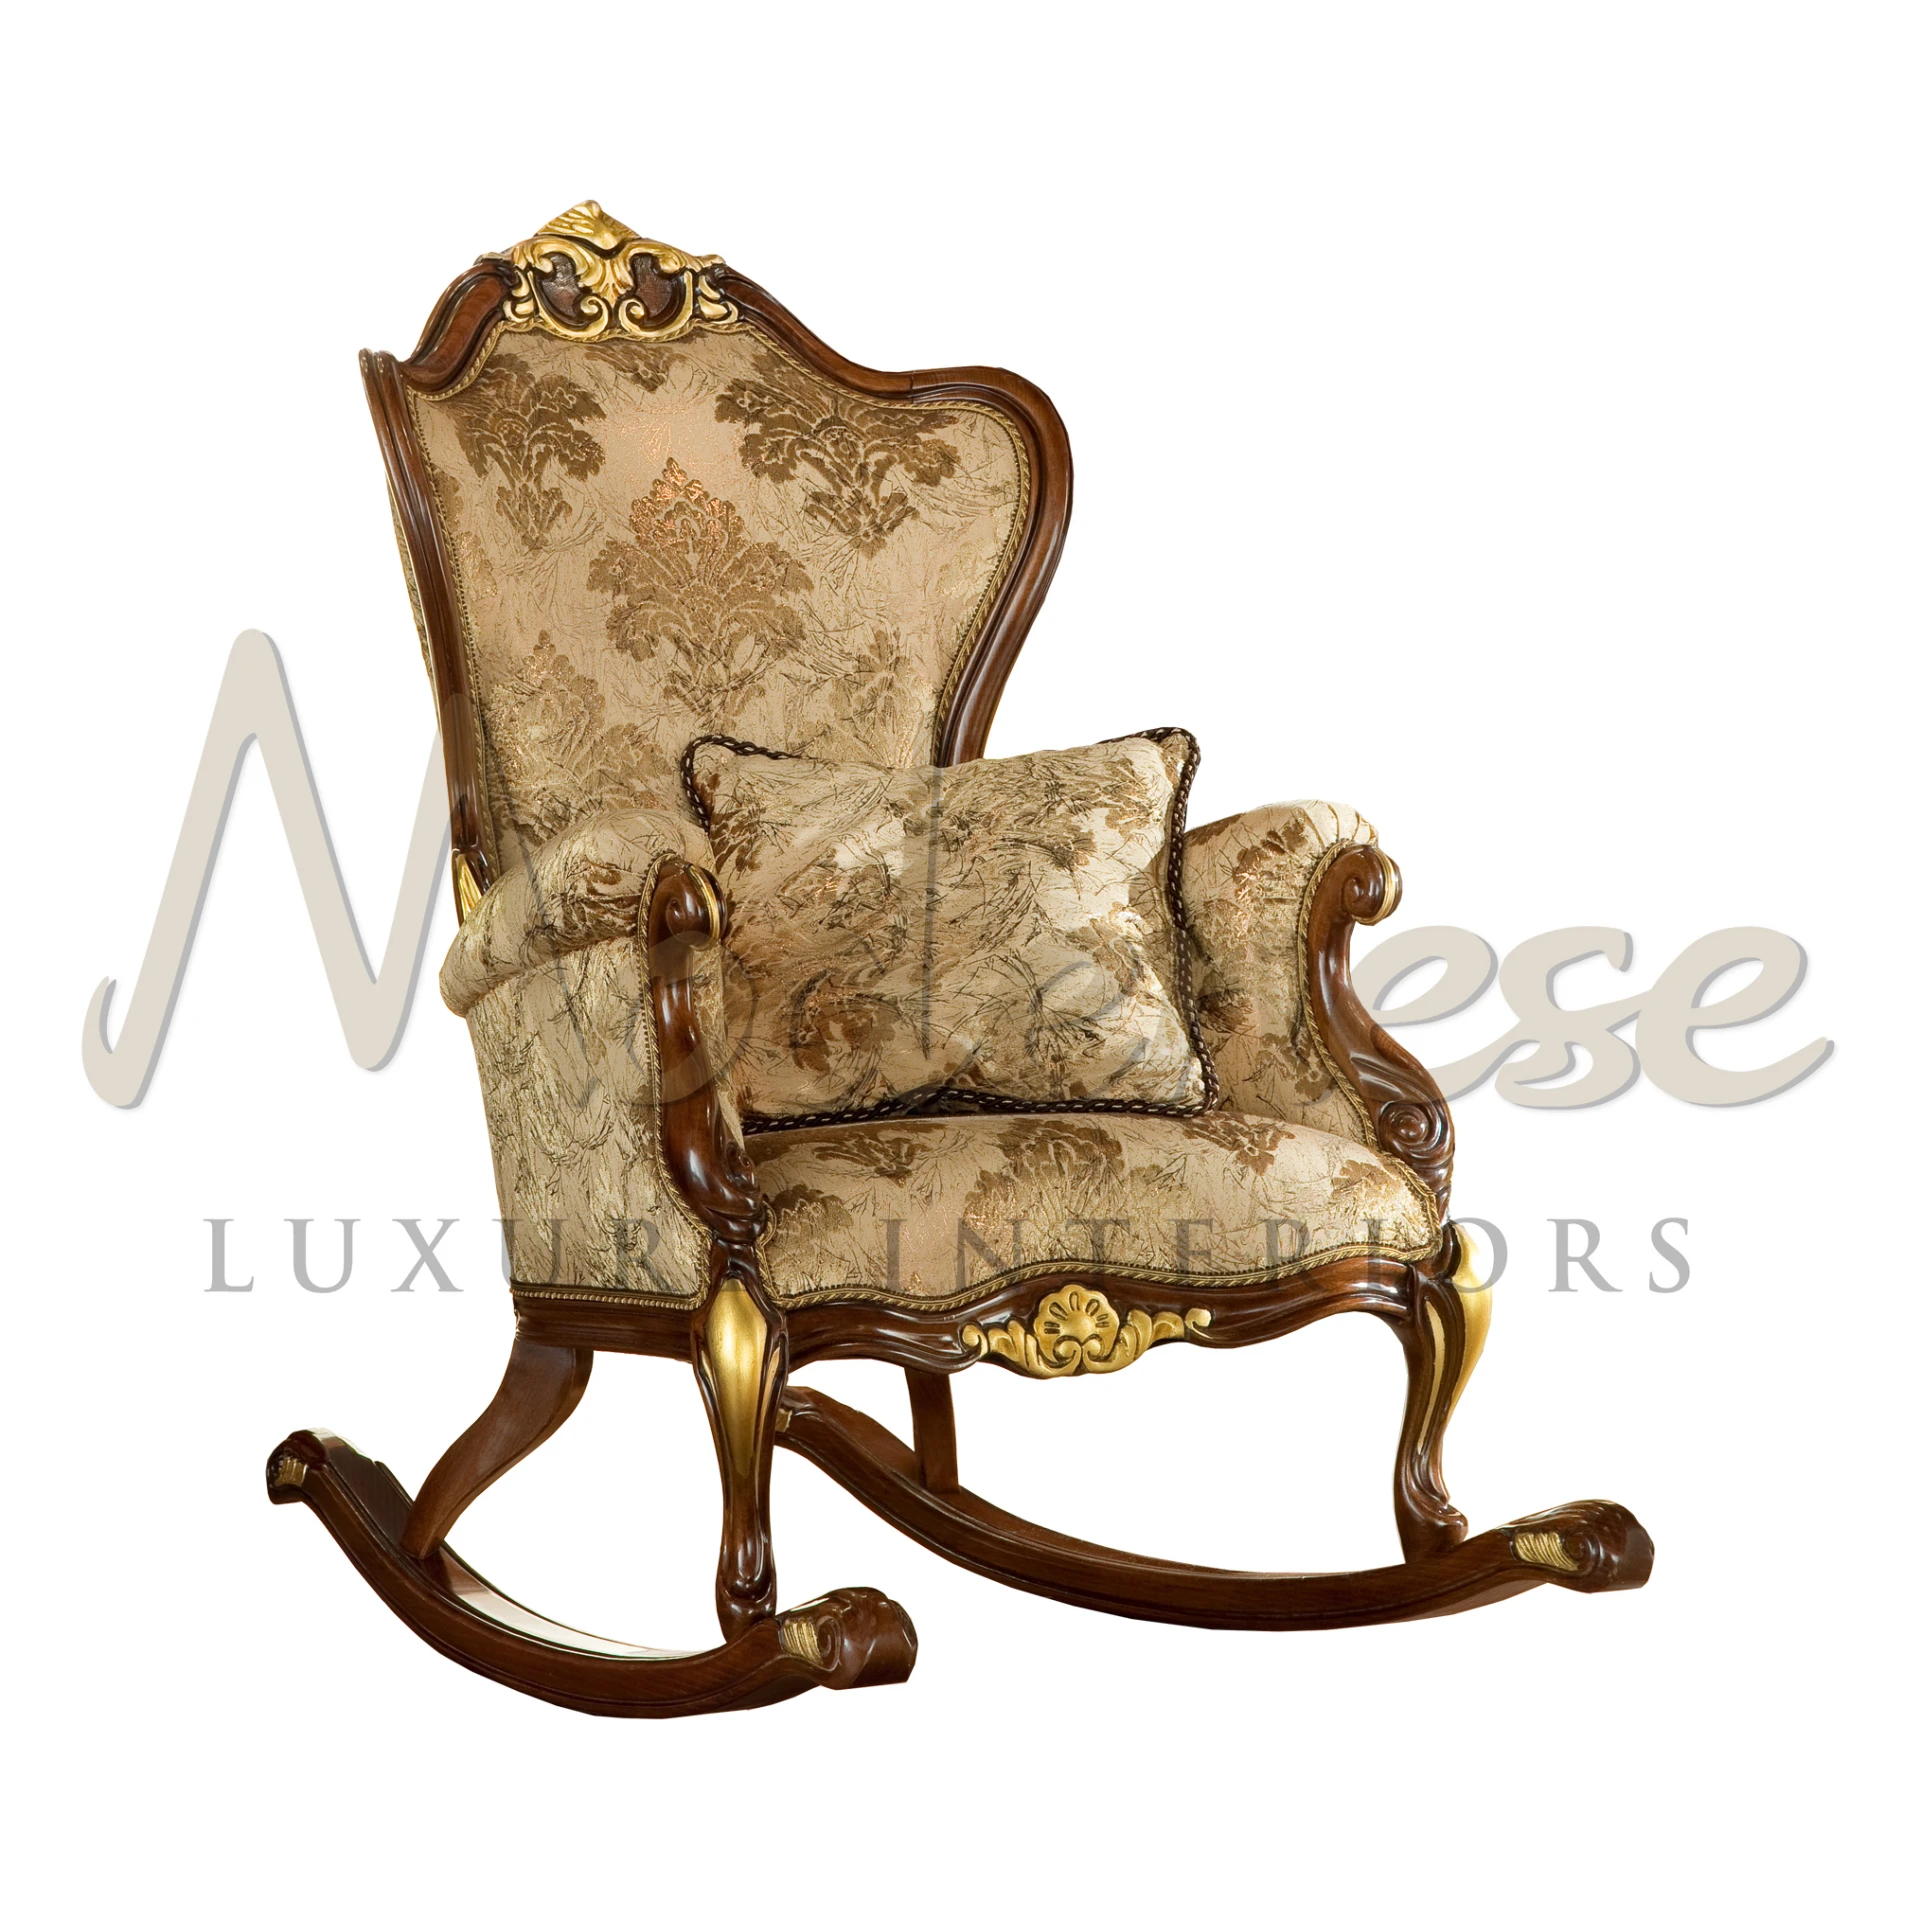 Ornate wooden rocking chair with a polished finish and luxurious golden upholstery, featuring detailed carvings and a plush cushioned backrest and seat.